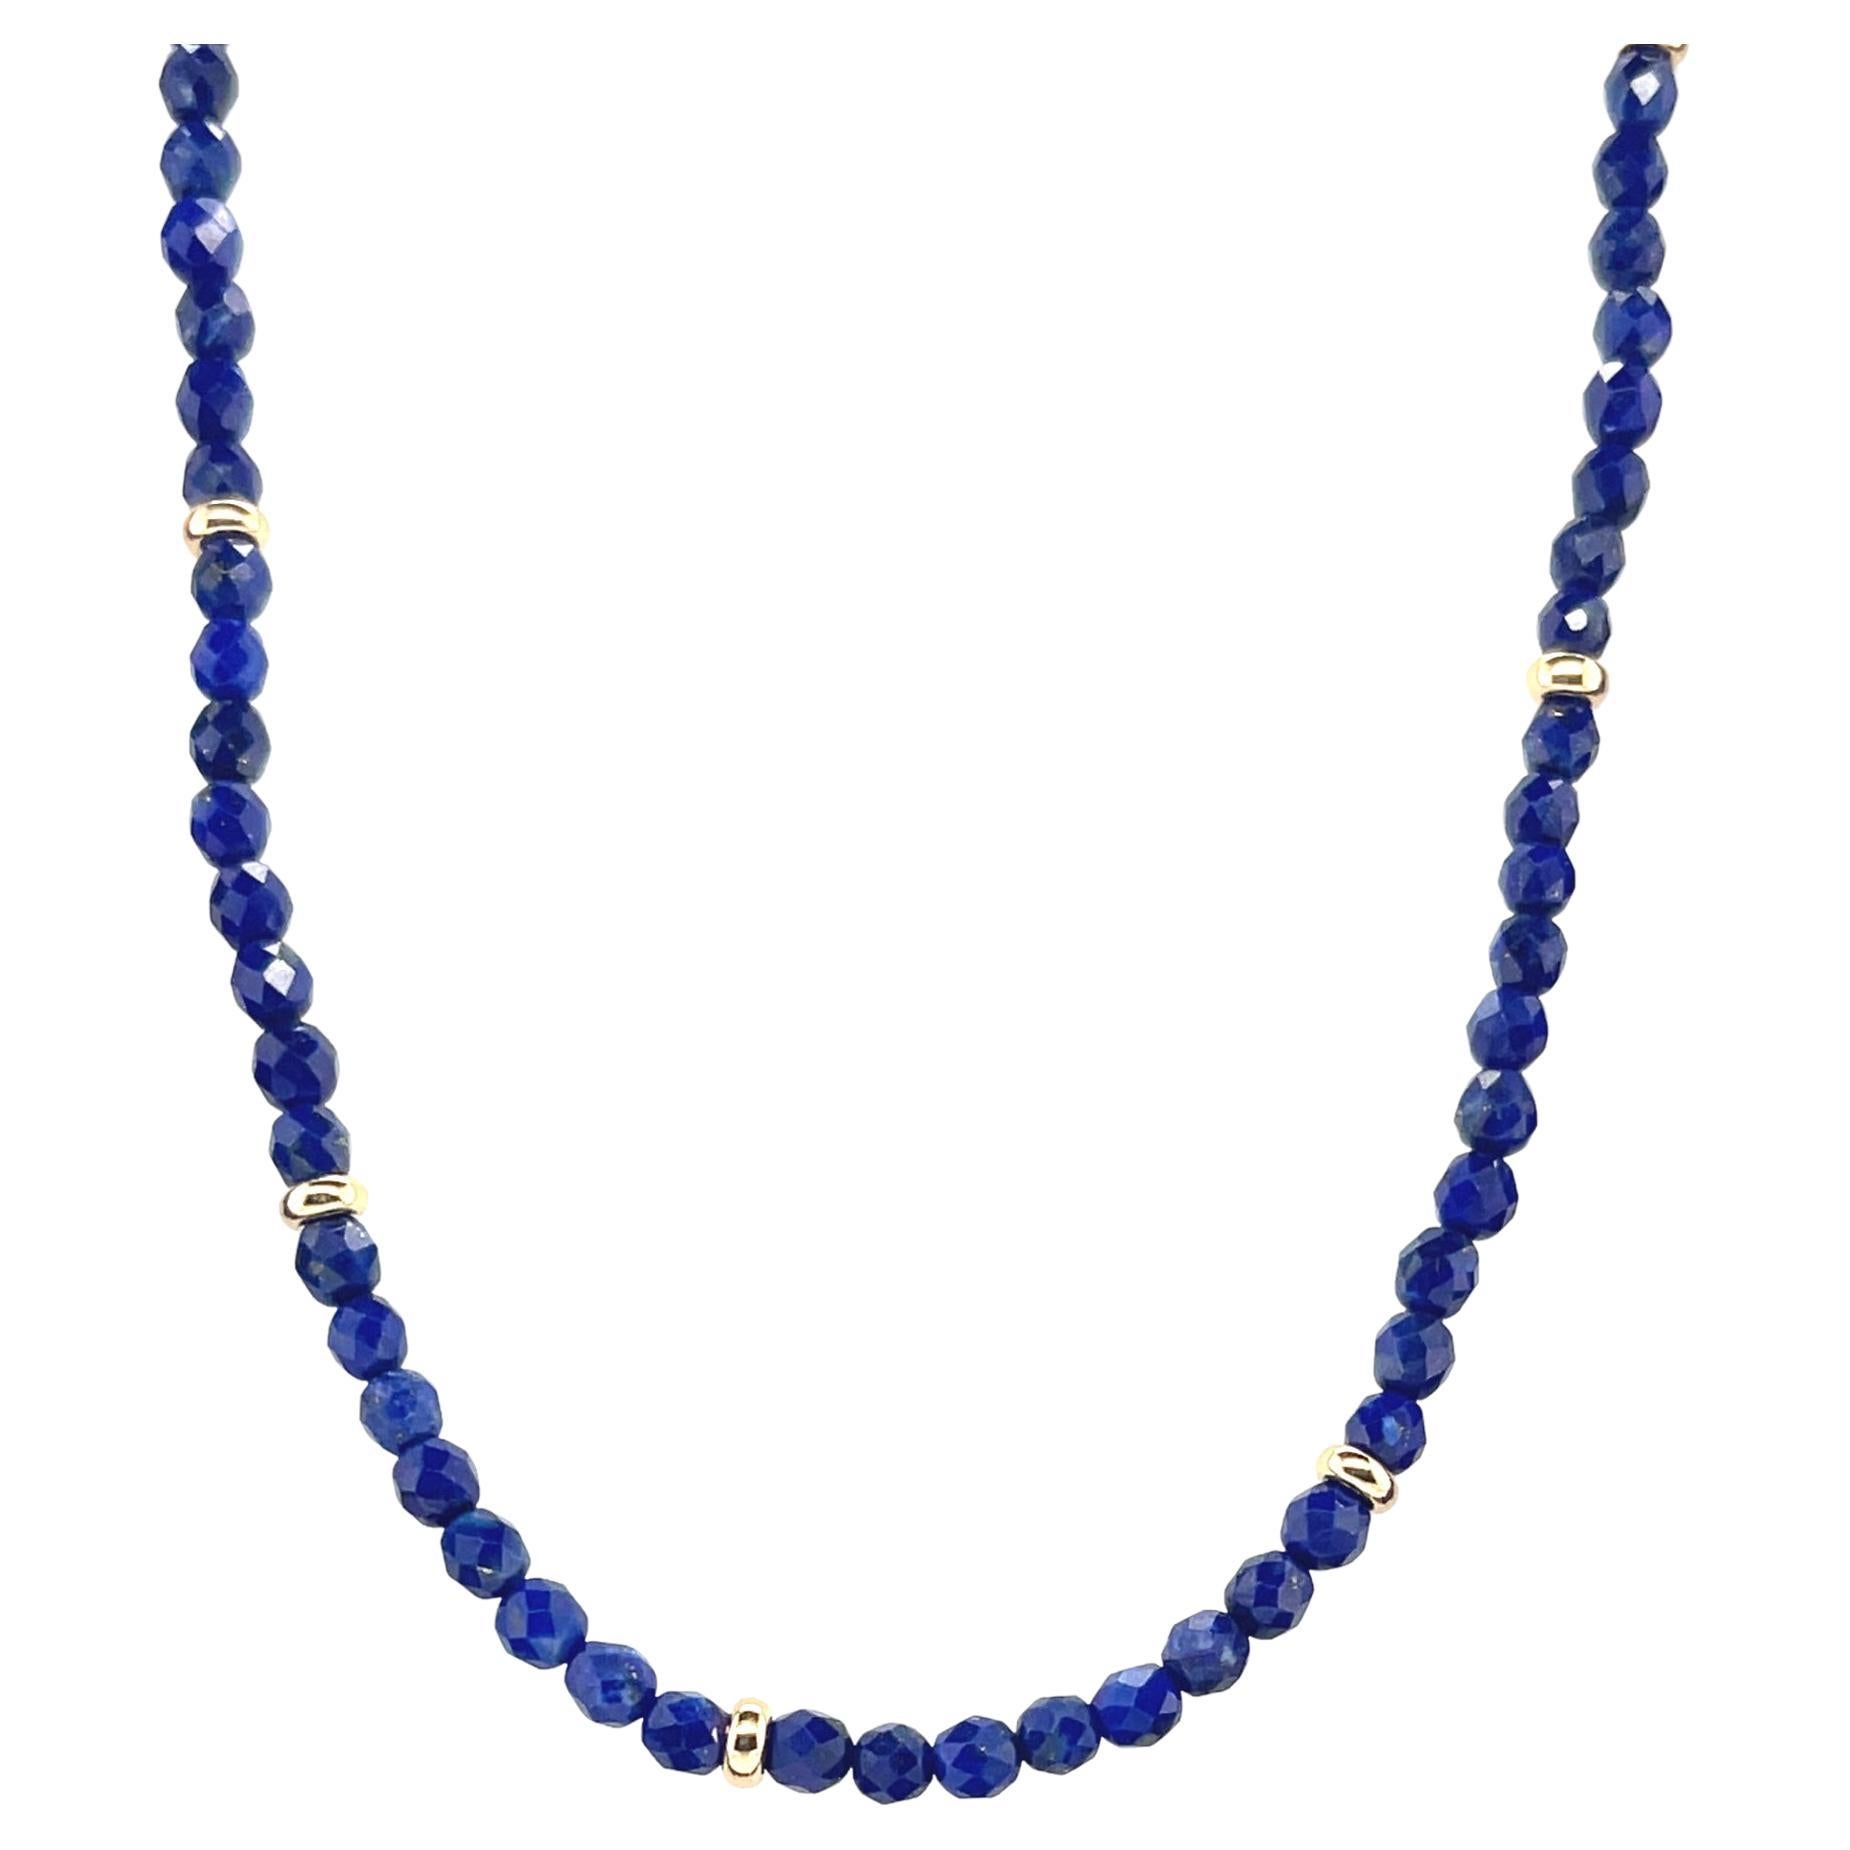 Faceted Lapis Bead Necklace with Yellow Gold Accents, 32 Inches For Sale